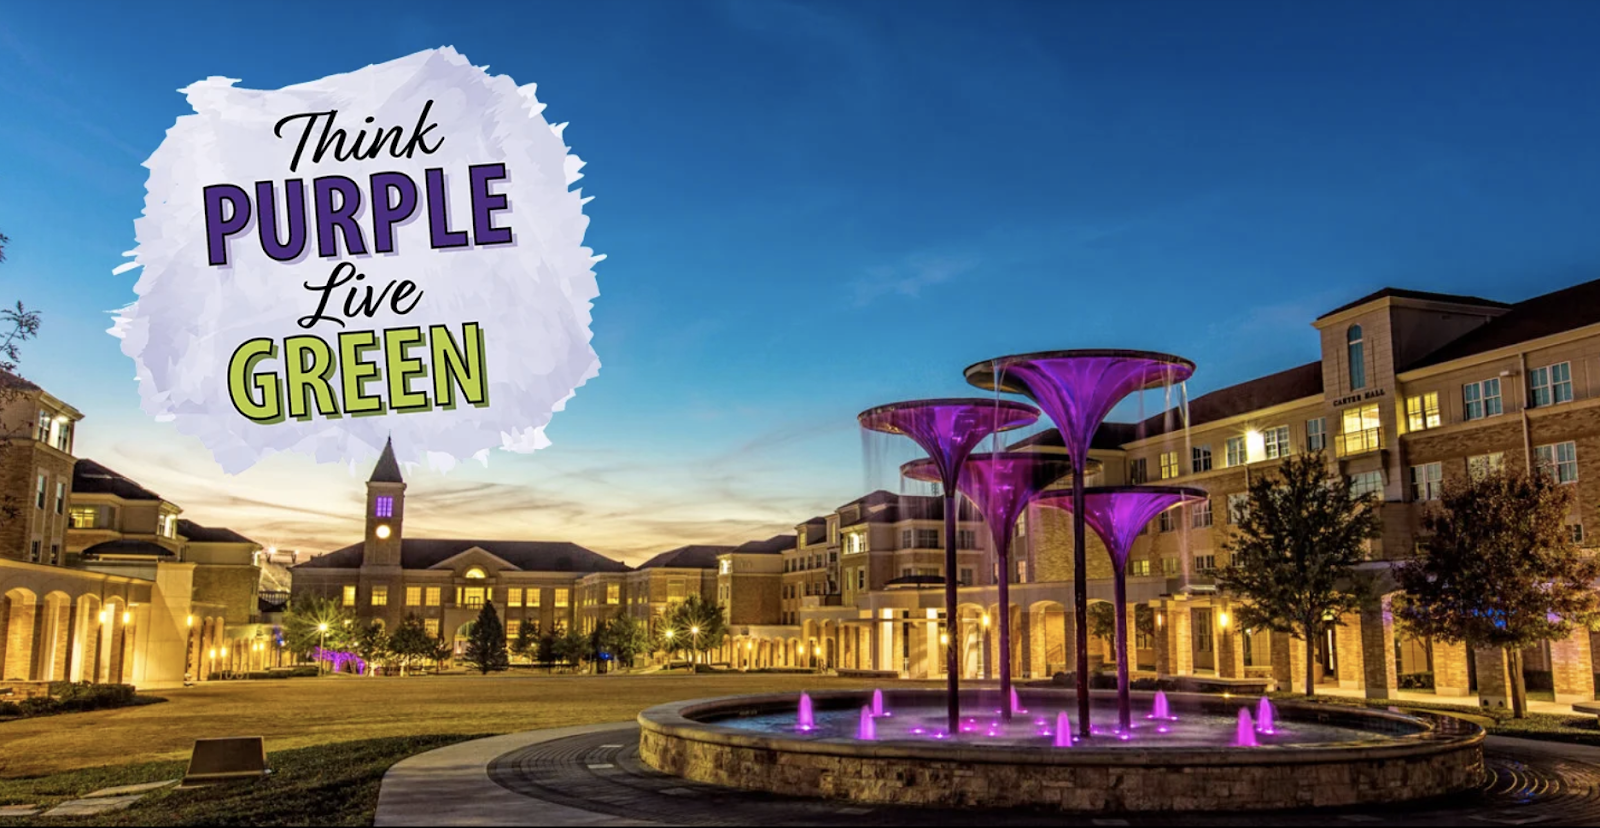 Image of frogfountain at down with a watercolor graphic that says think purple live green